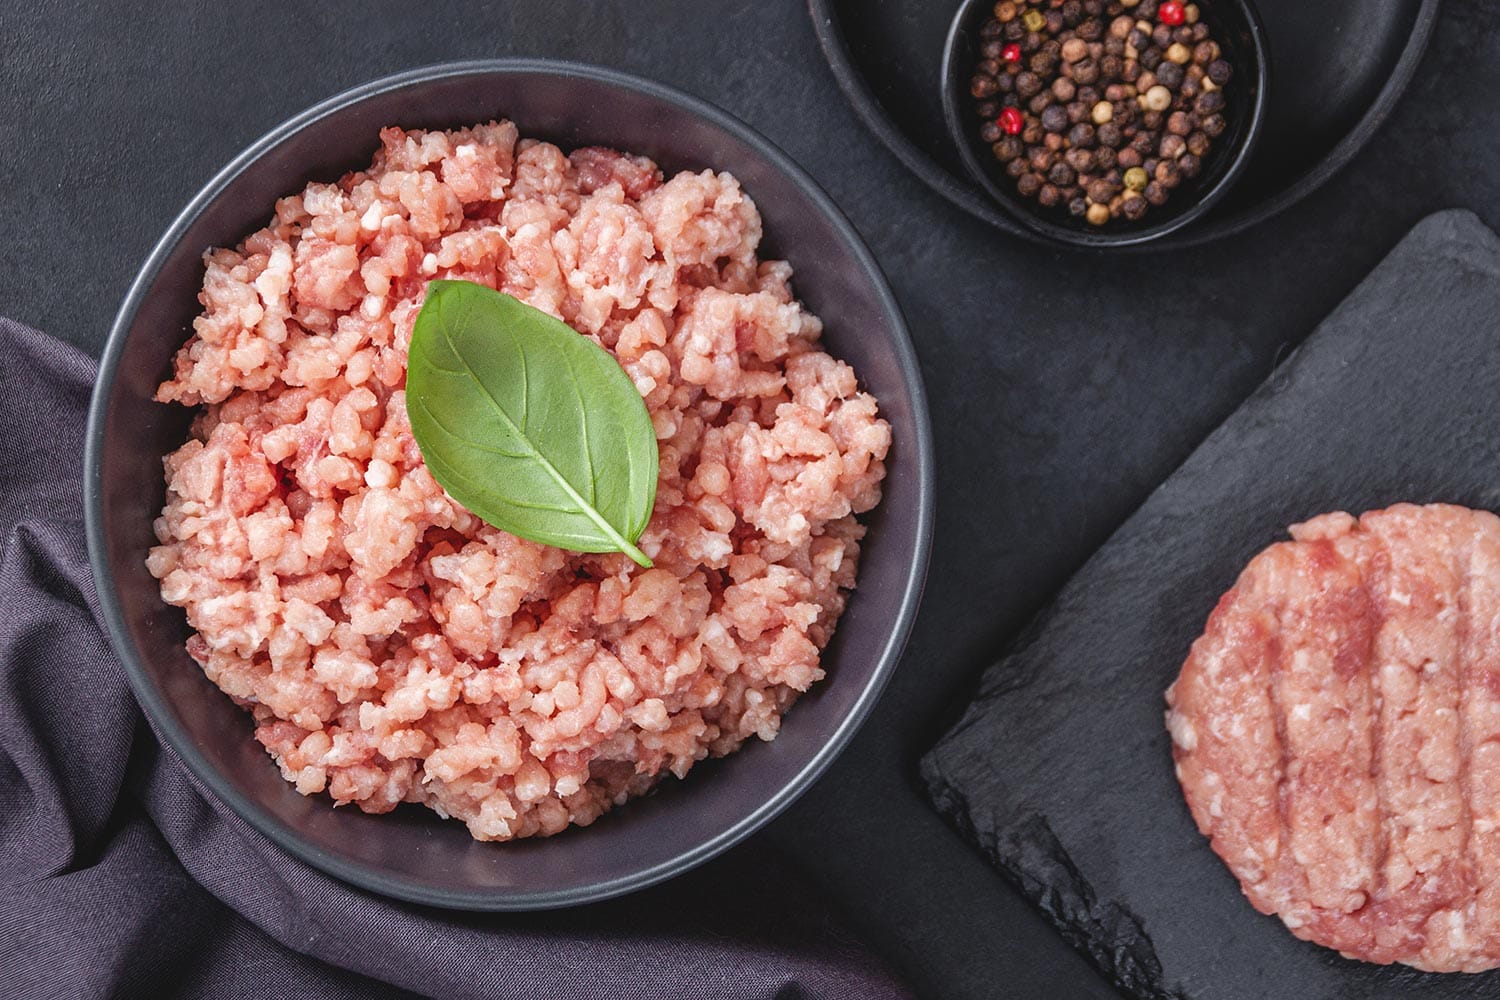 Raw minced meat in bowl on black stone table and ingredients.